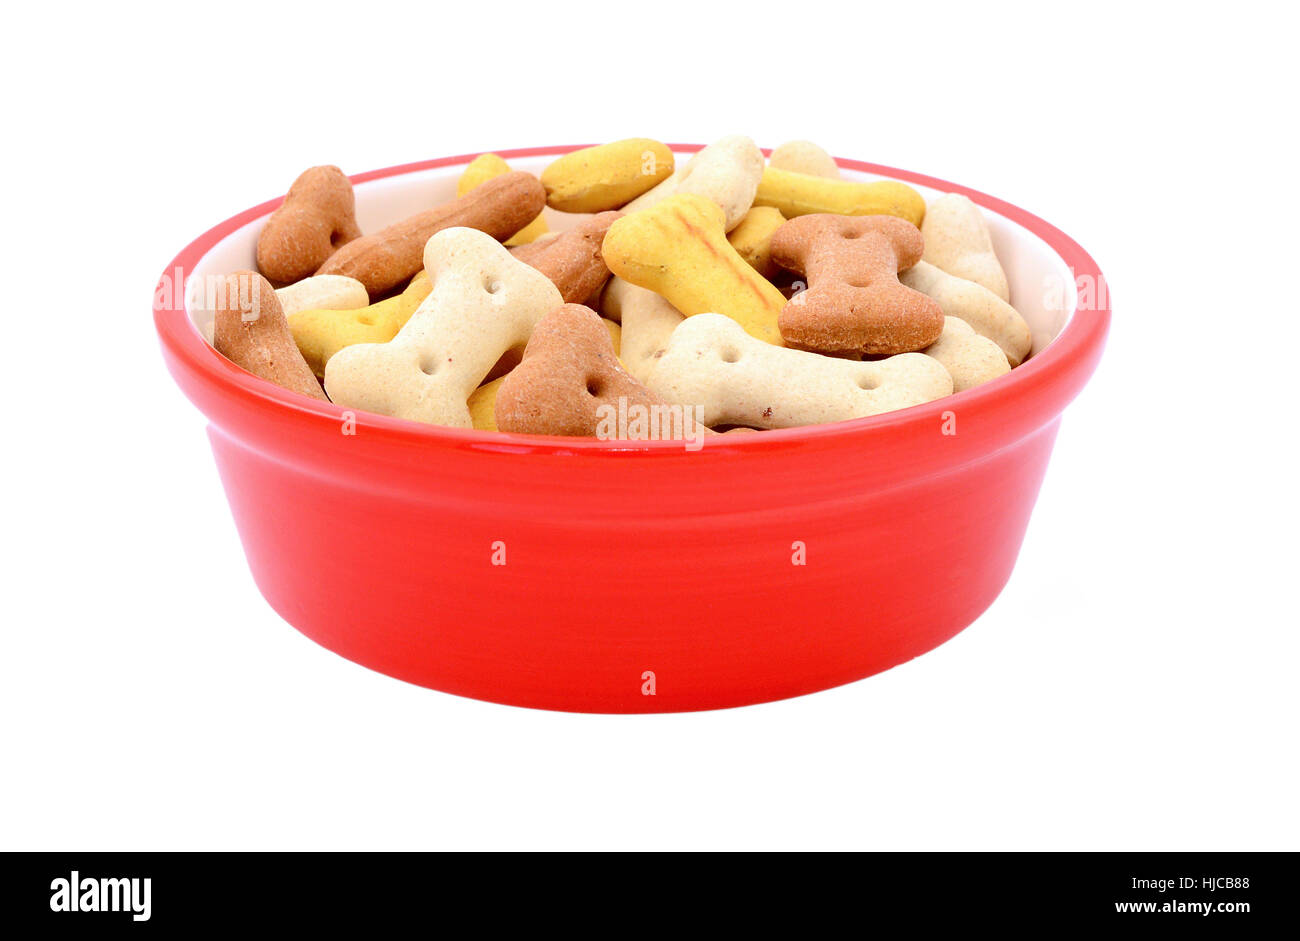 Dry bone-shaped dog biscuits in a red pet food bowl, isolated on a white background Stock Photo